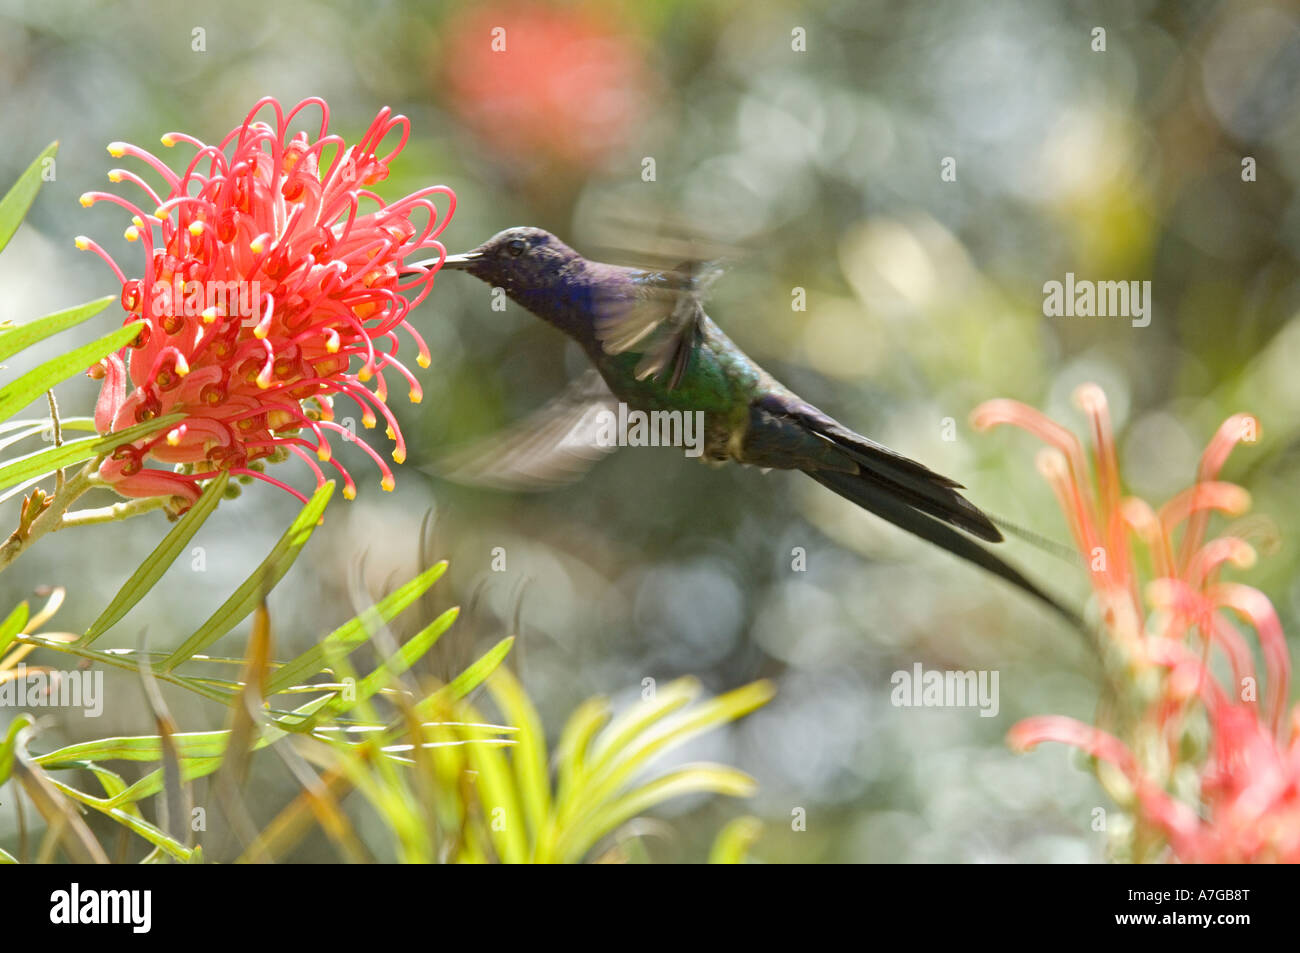 A Swallow-Tailed humming bird (Eupetomena Macroura) in flight about to take nectar from a Kahili flower (Grevillea Banksii). Stock Photo